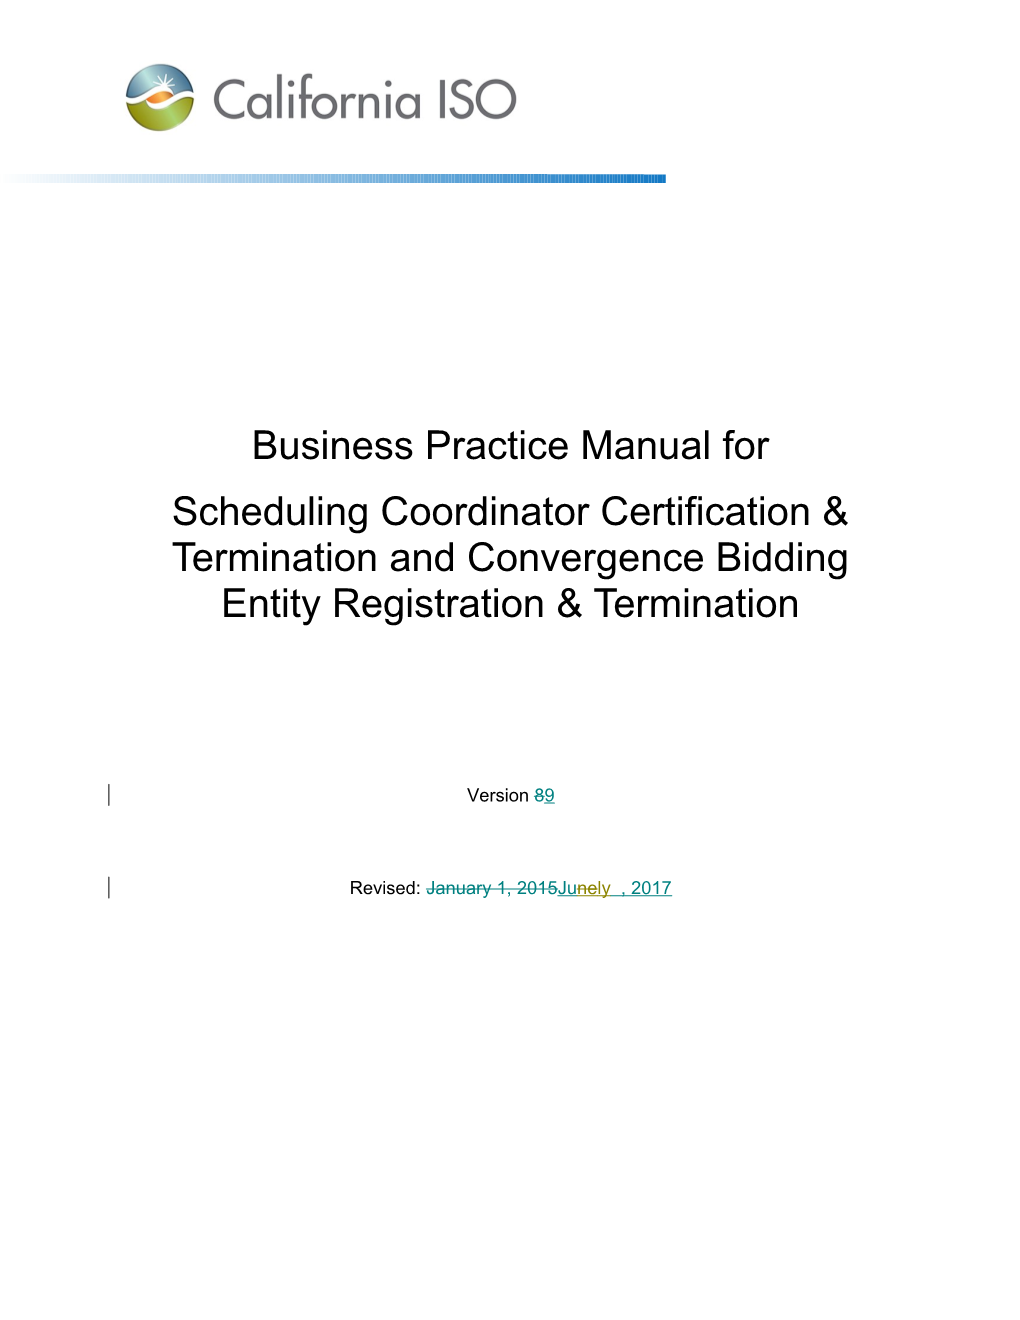 Business Practice Manual For s11